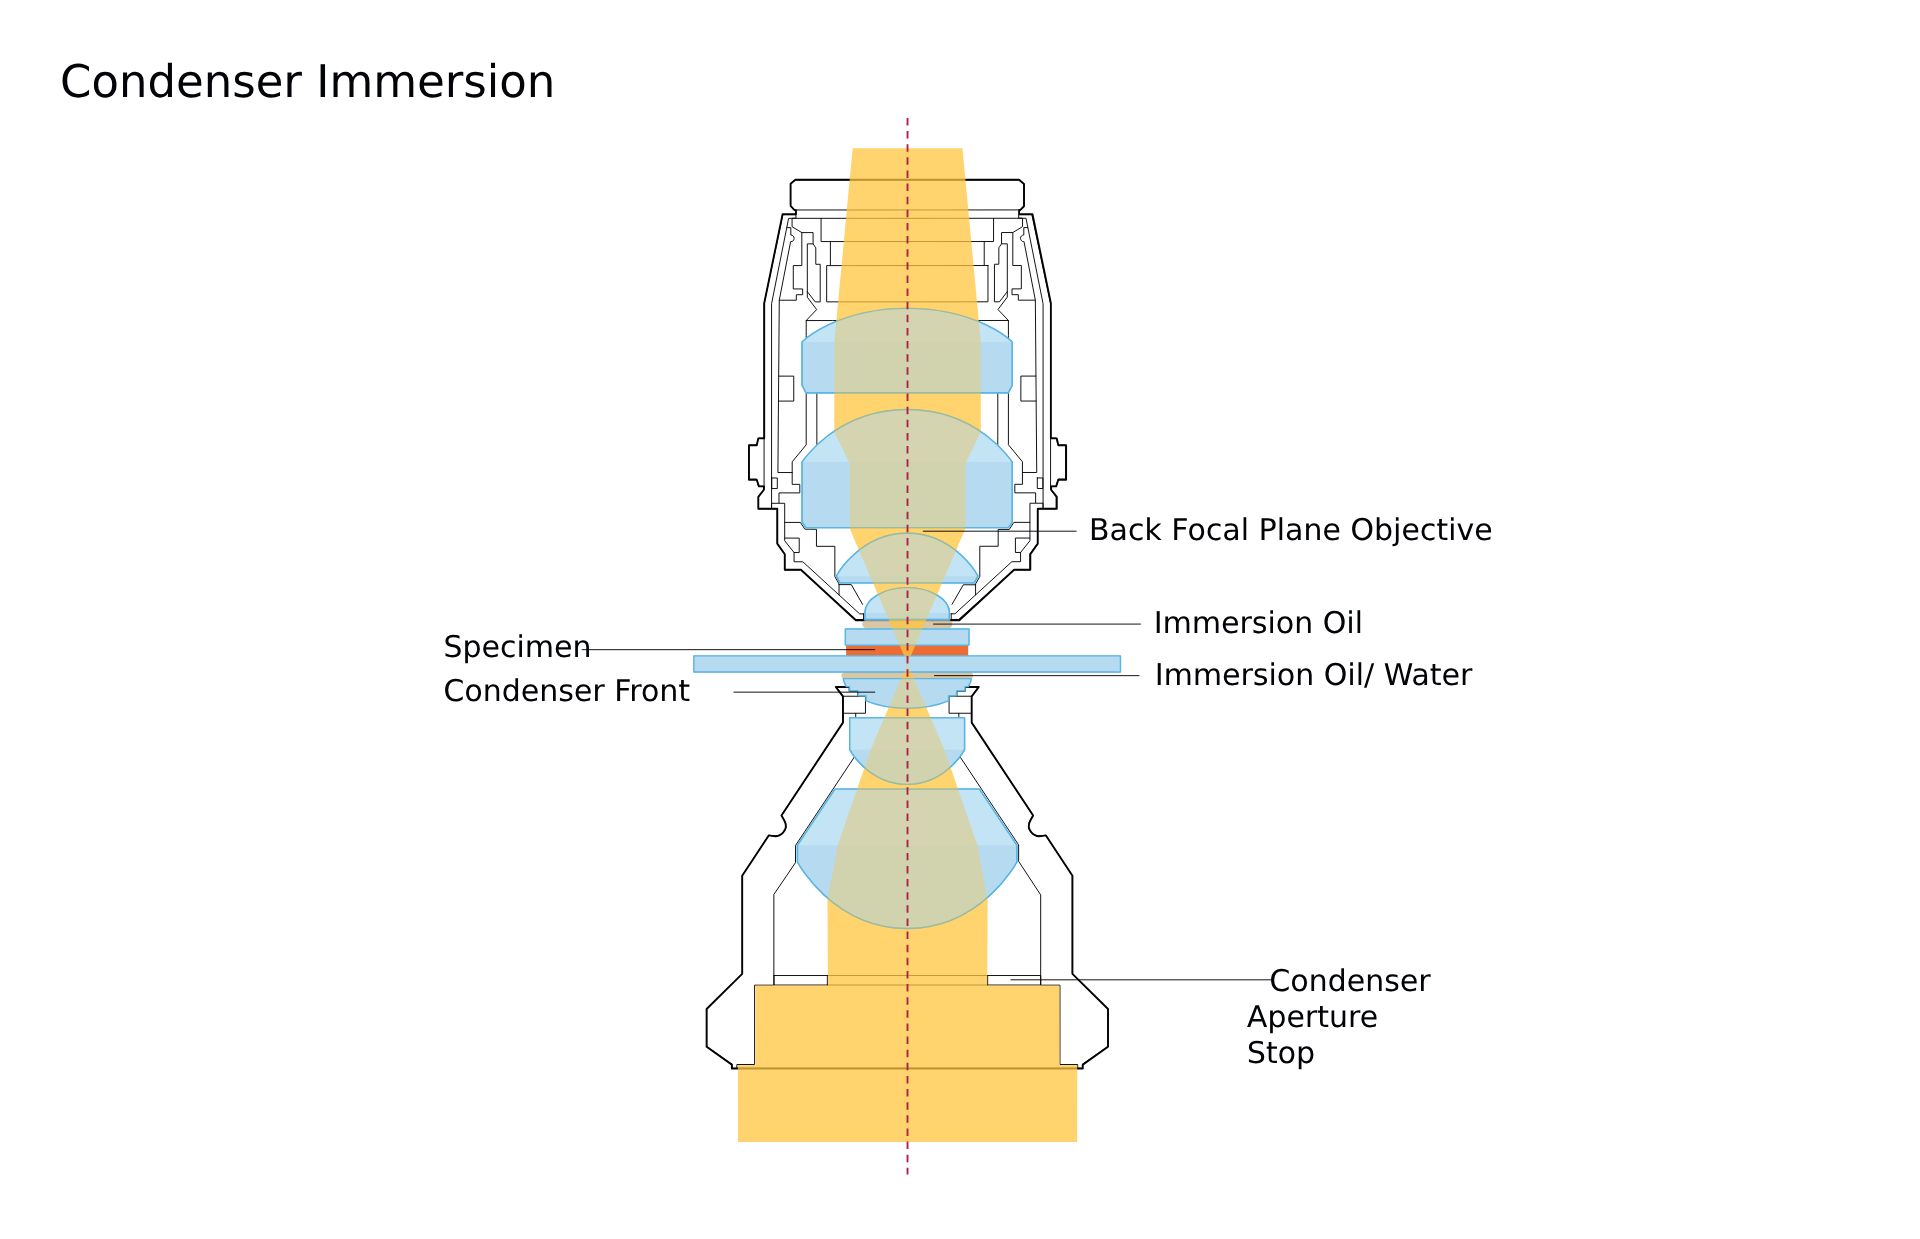 Diagram of a condenser immersion system in microscopy, showing components like the specimen, immersion oil, and lenses